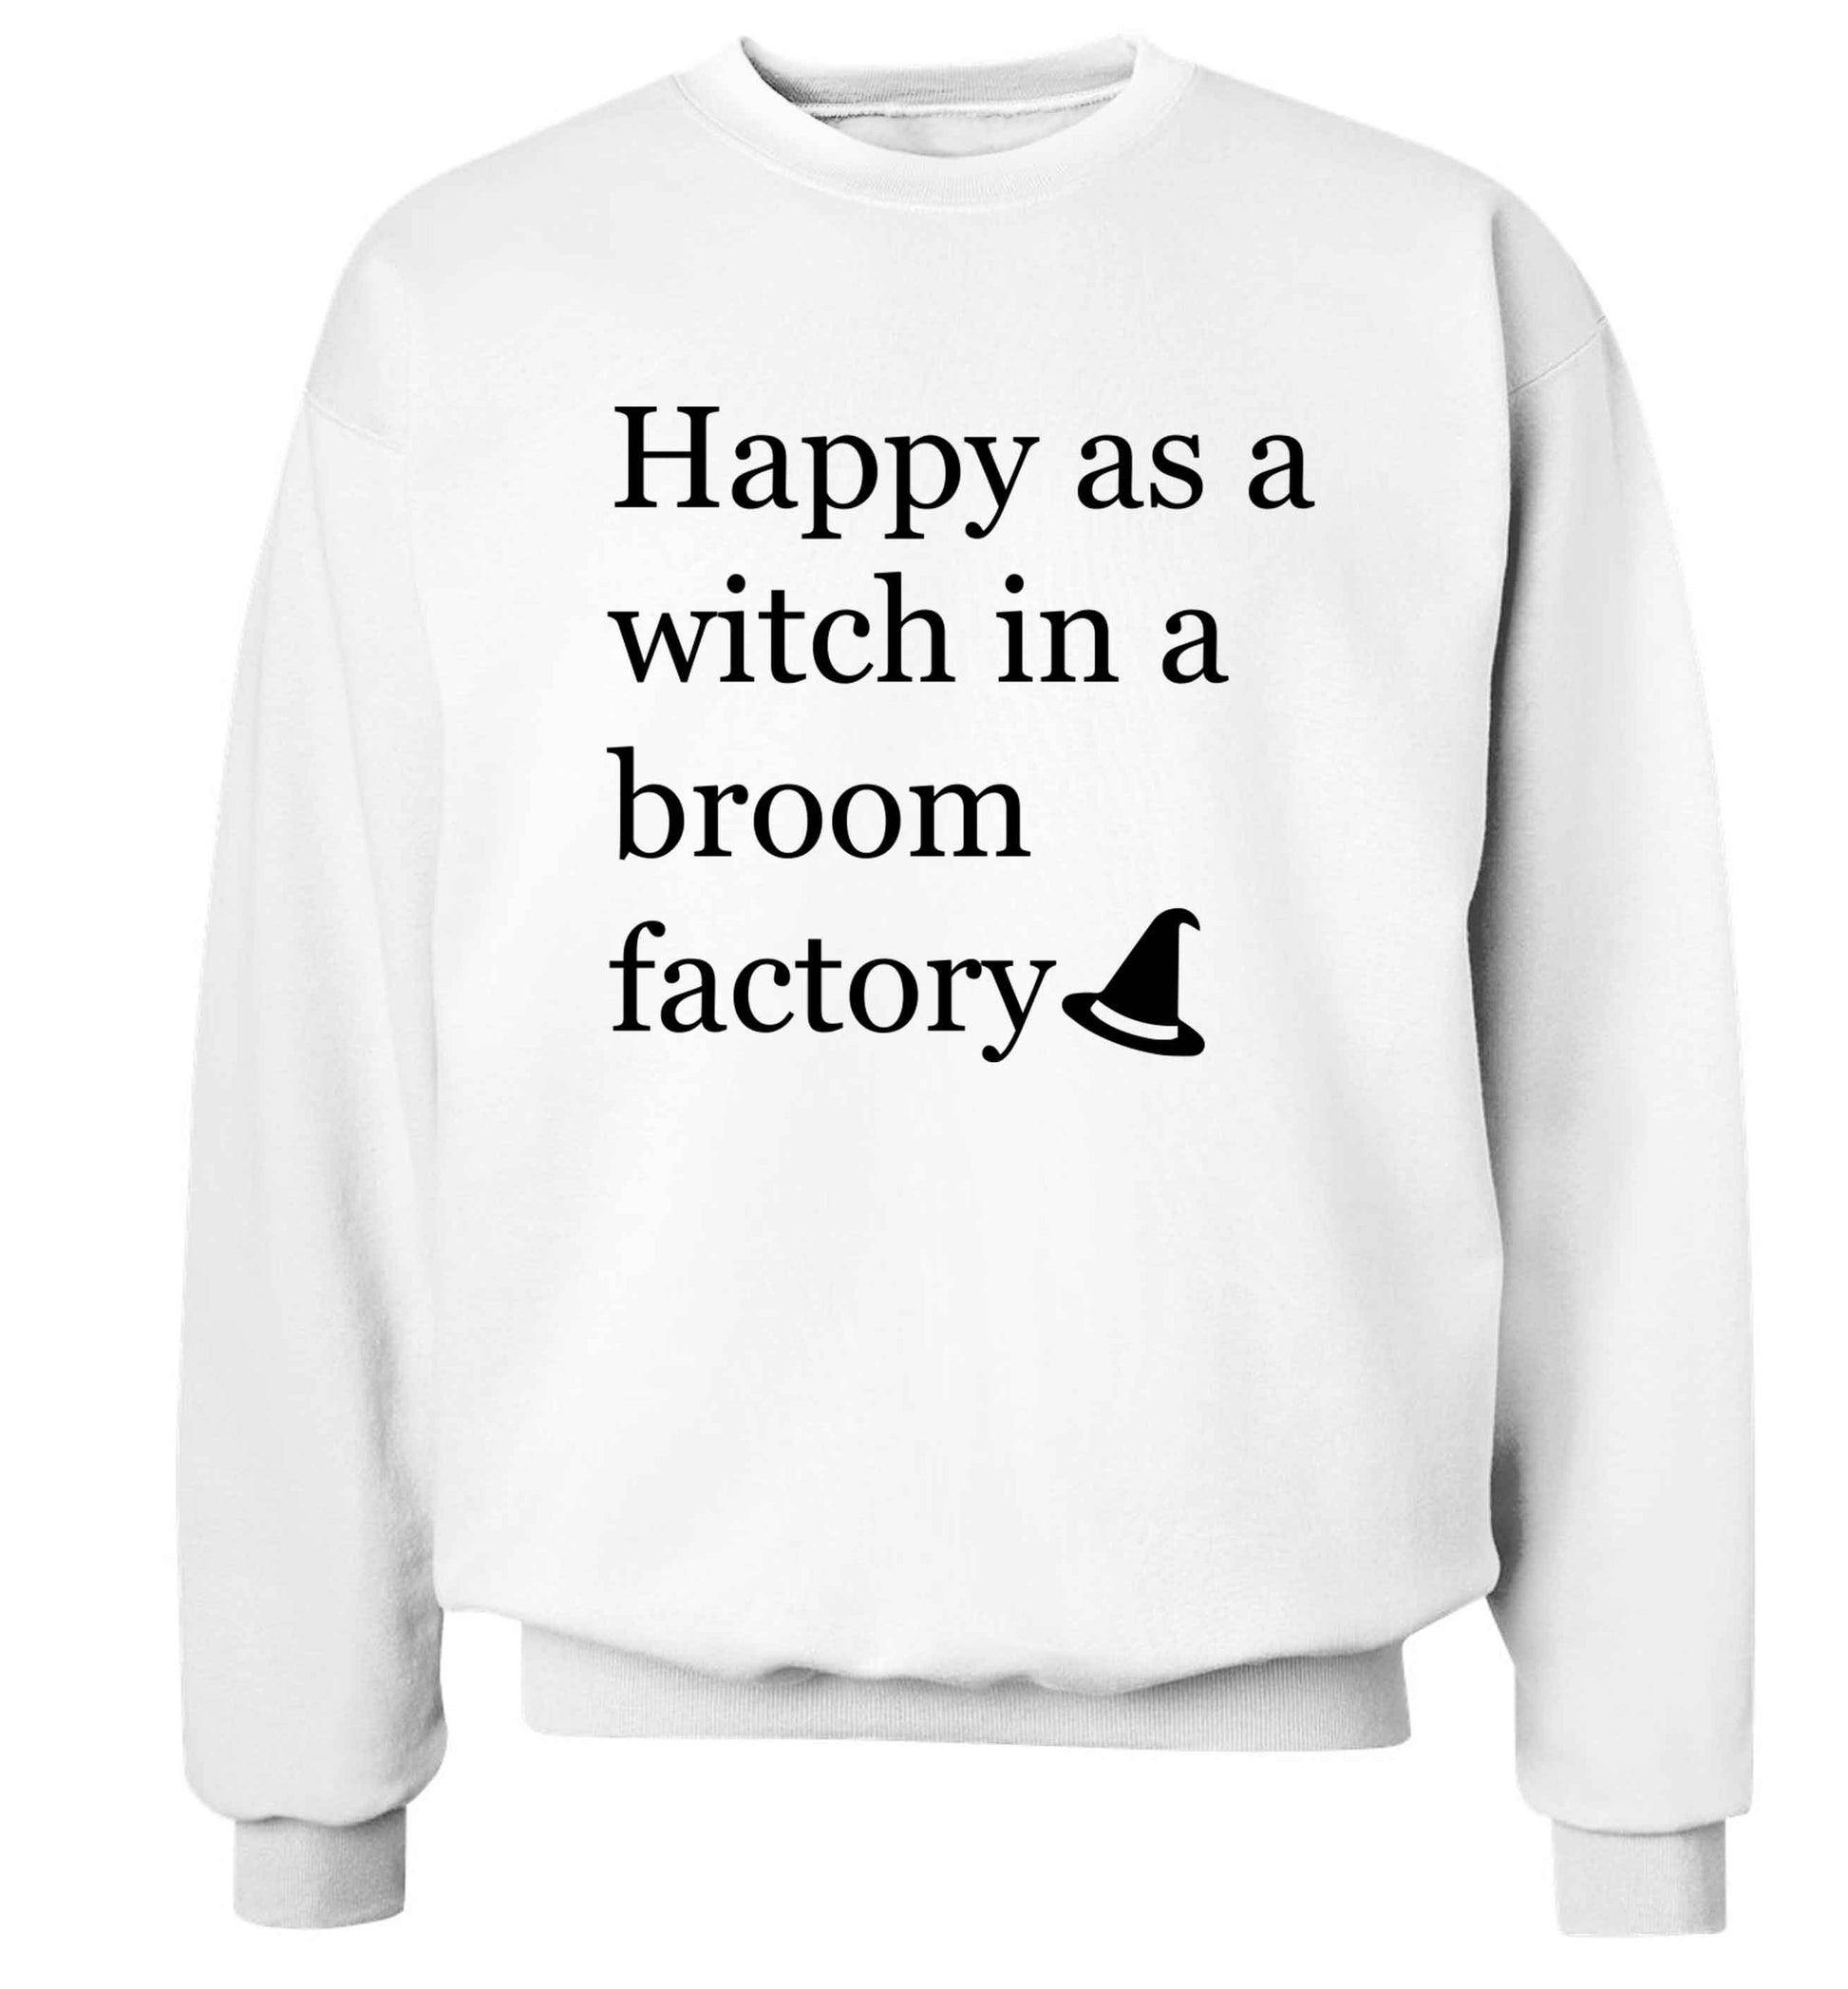 Happy as a witch in a broom factory Adult's unisex white Sweater 2XL